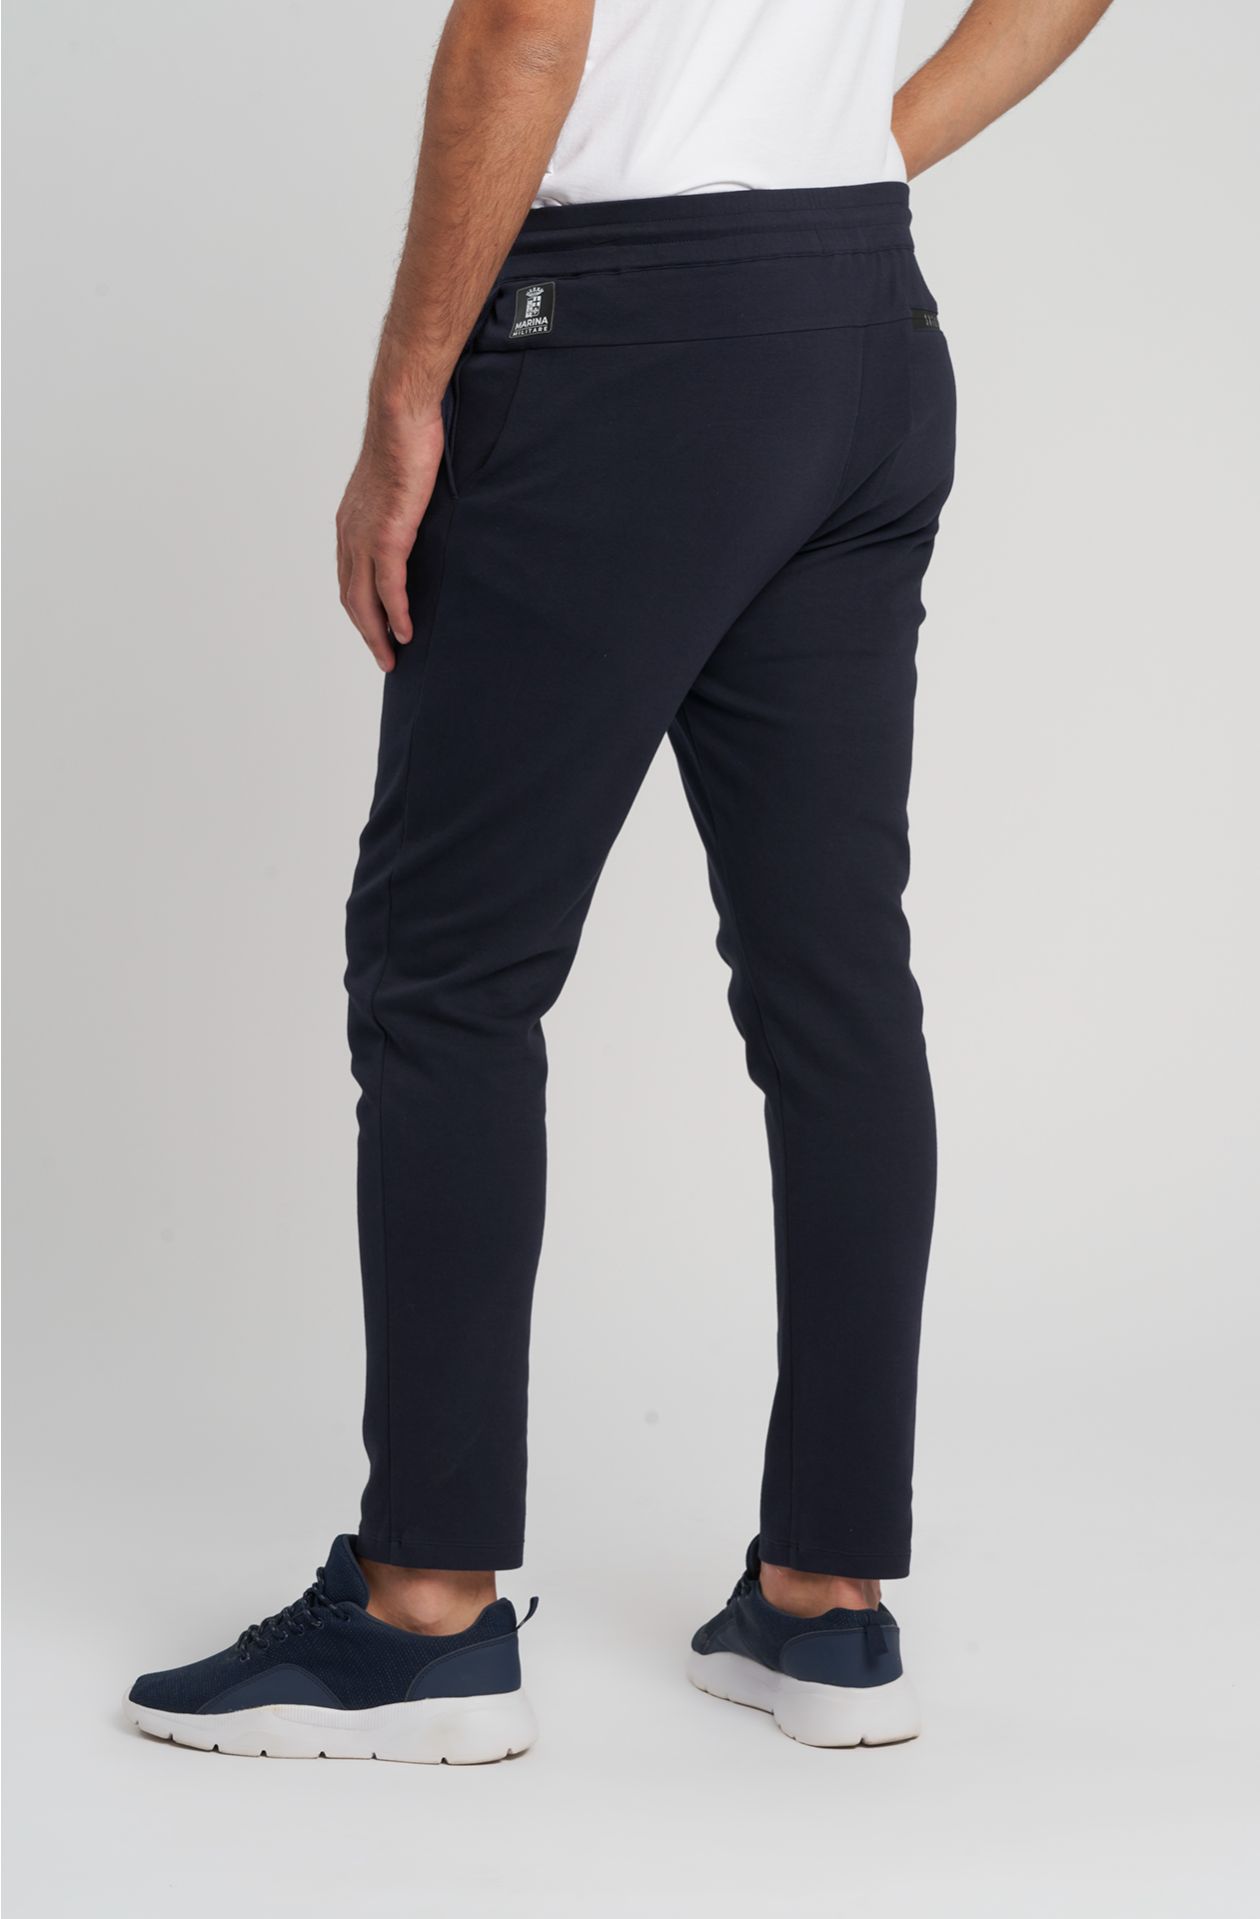 Sailing team line trousers